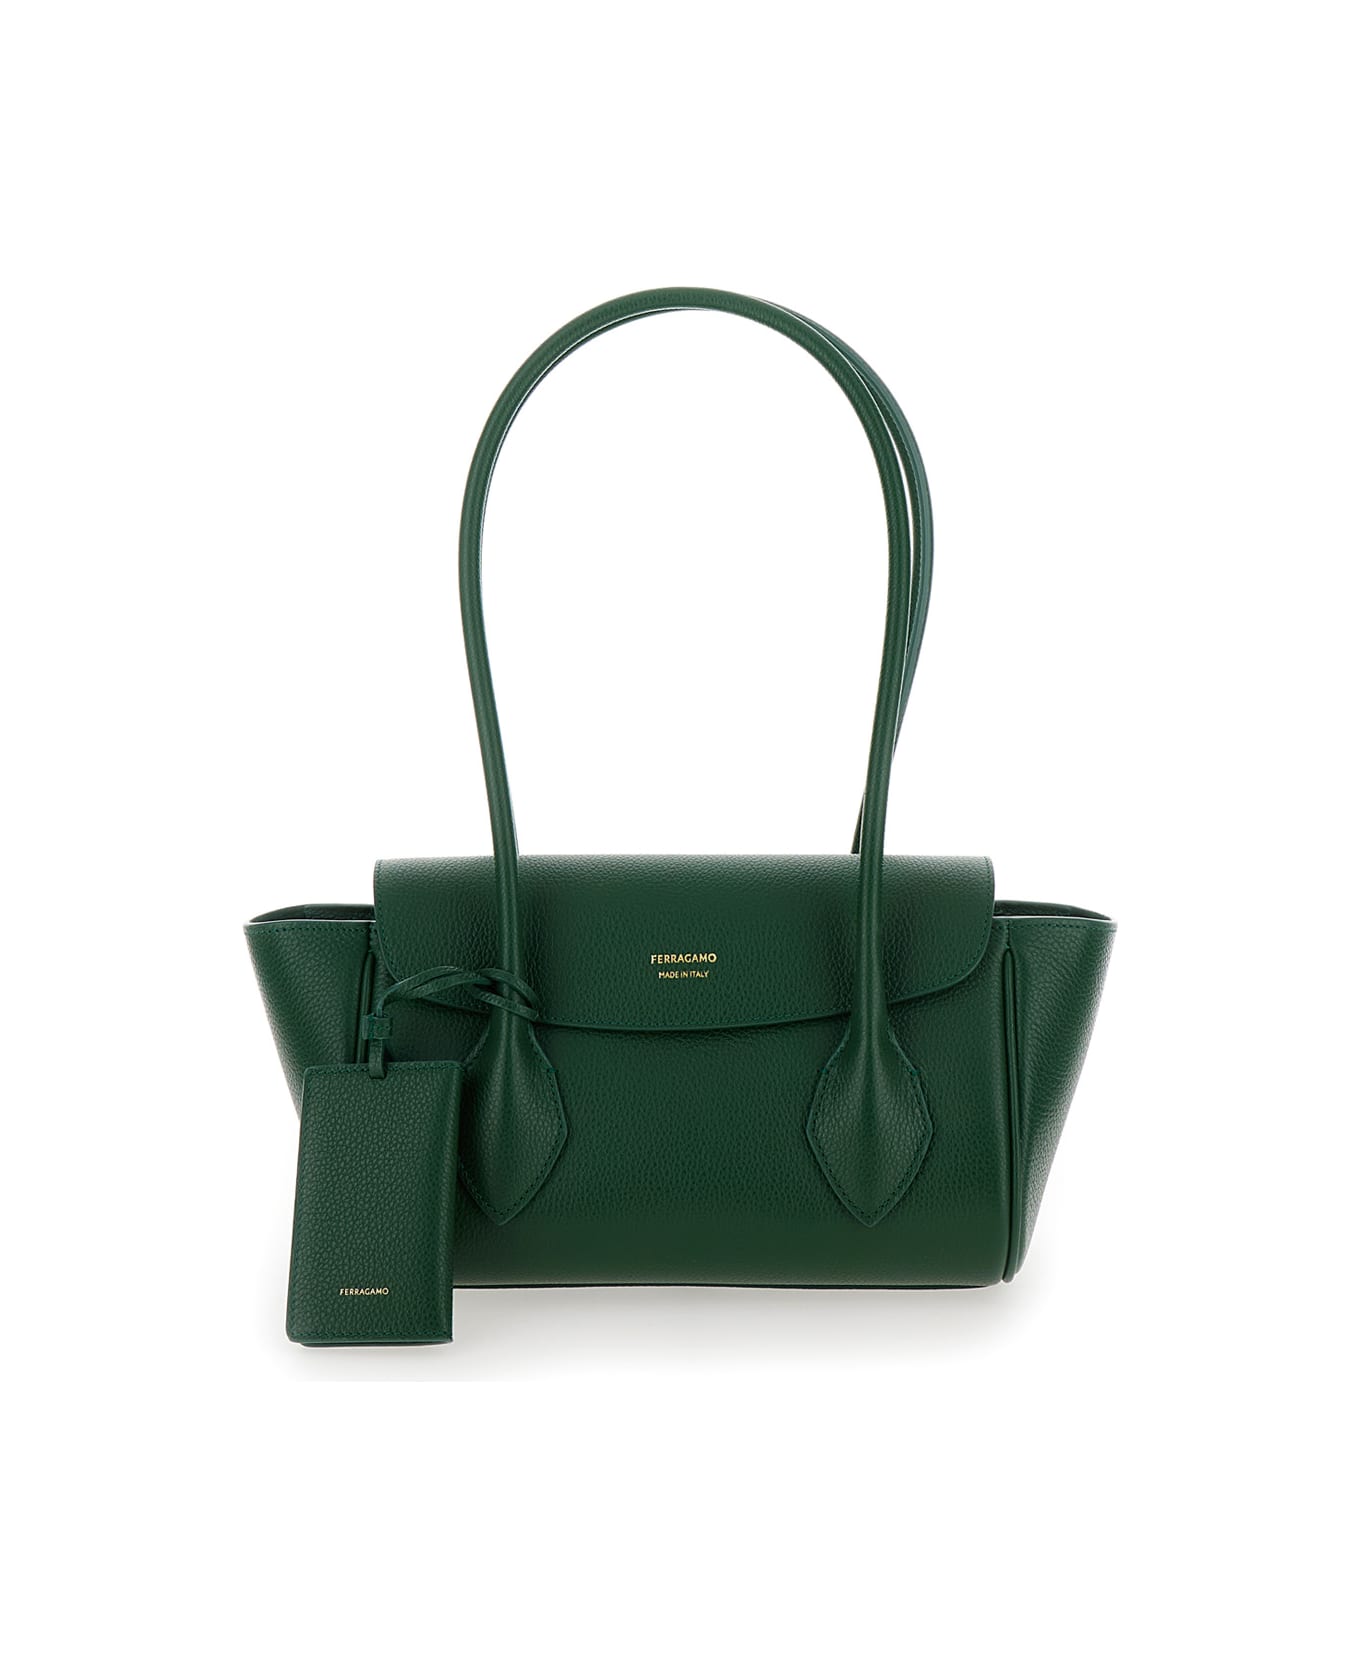 Ferragamo 'east-west S' Green Handbag With Logo Detail In Hammered Leather Woman - Green